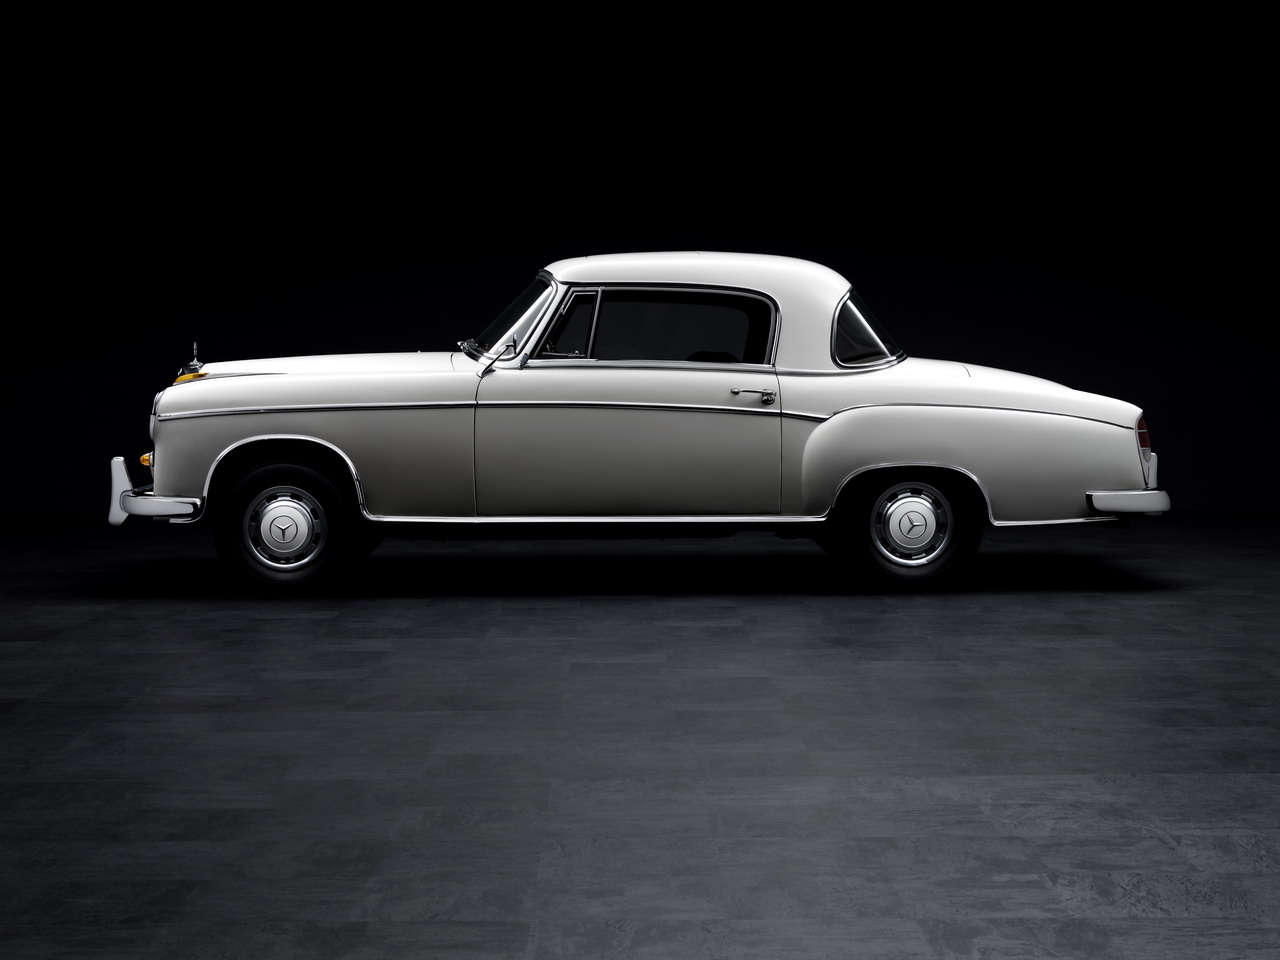 mercedes-benz 220s coupe-pic. 1